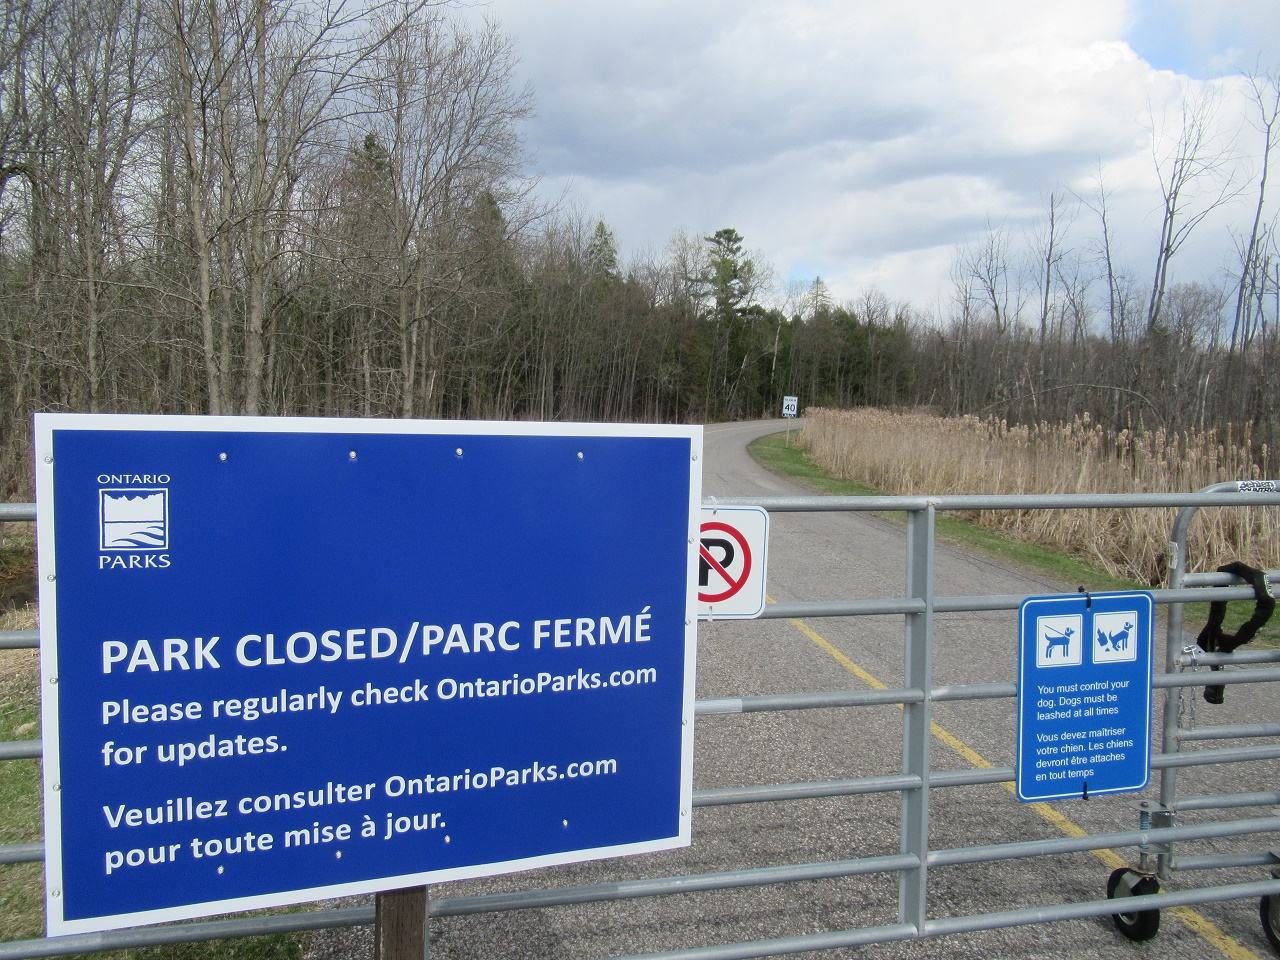 Provincial parks, conservation reserves will re-open for limited day-use access